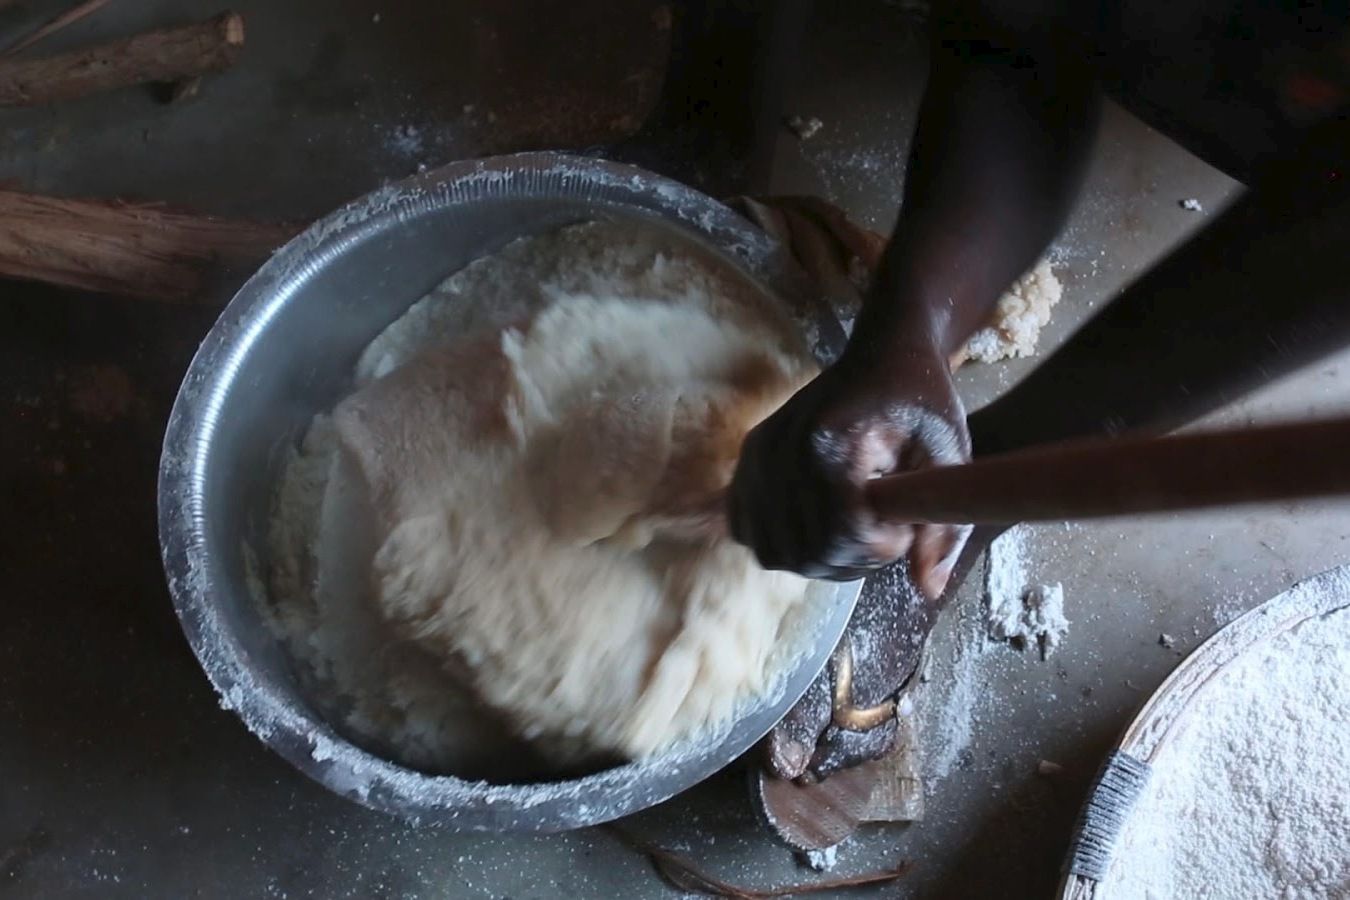 Nsima, the country’s staple food, is a stiff porridge of maize flour that has to be prepared fresh for every meal. Image by Nathalie Bertrams. Malawi, 2017.